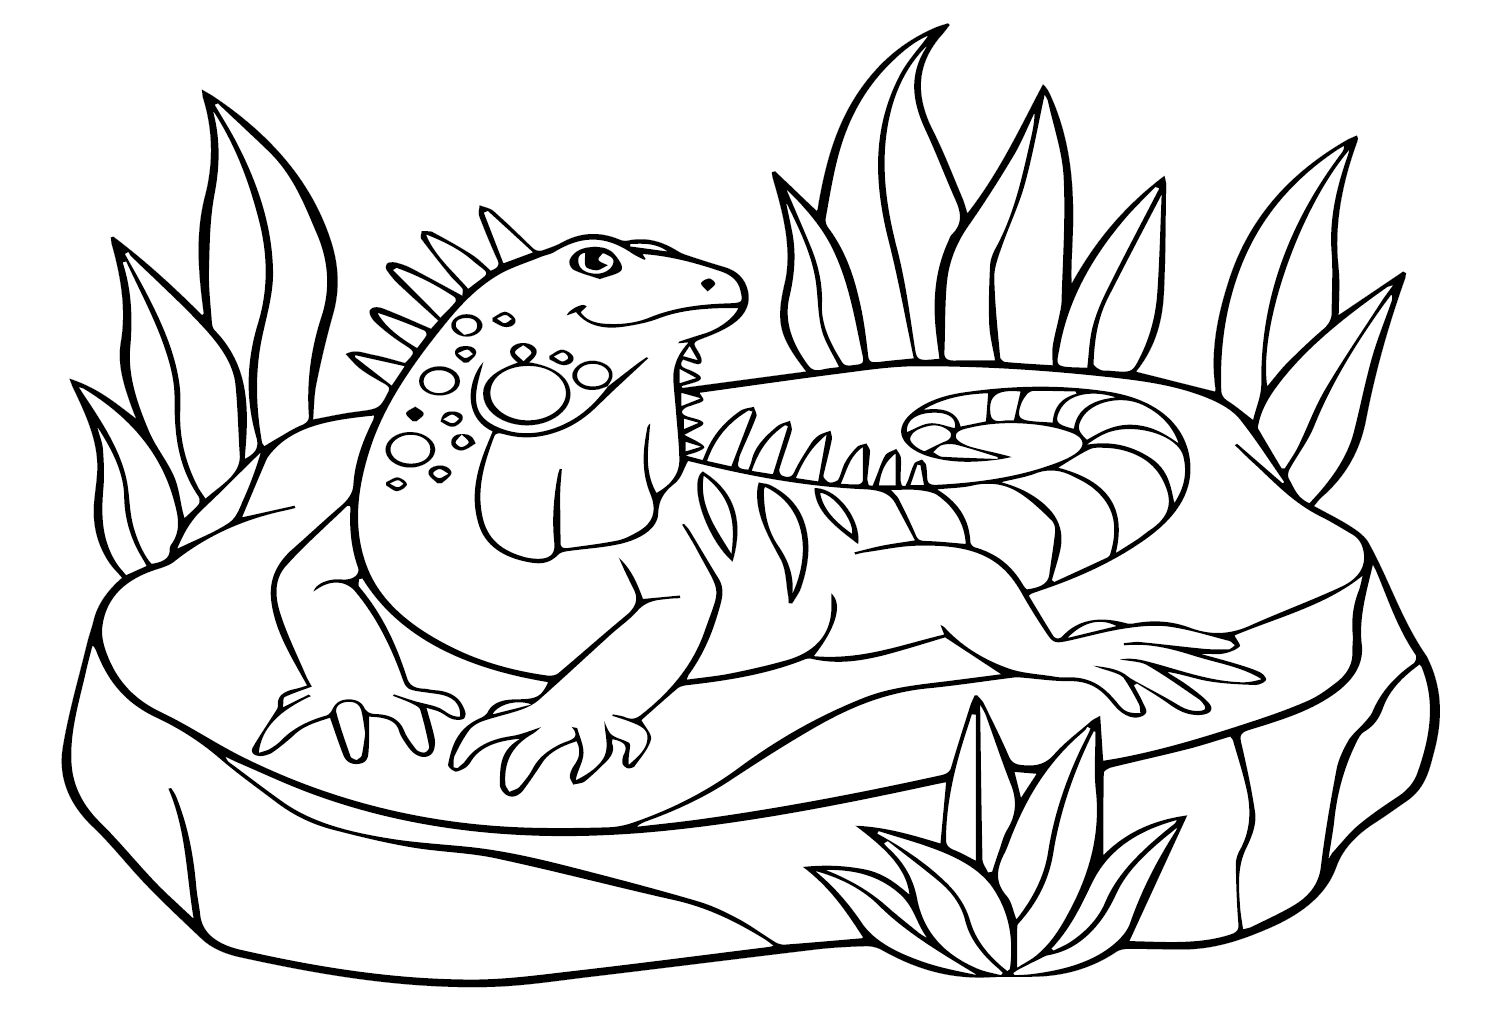 Outline of Iguana Coloring Page